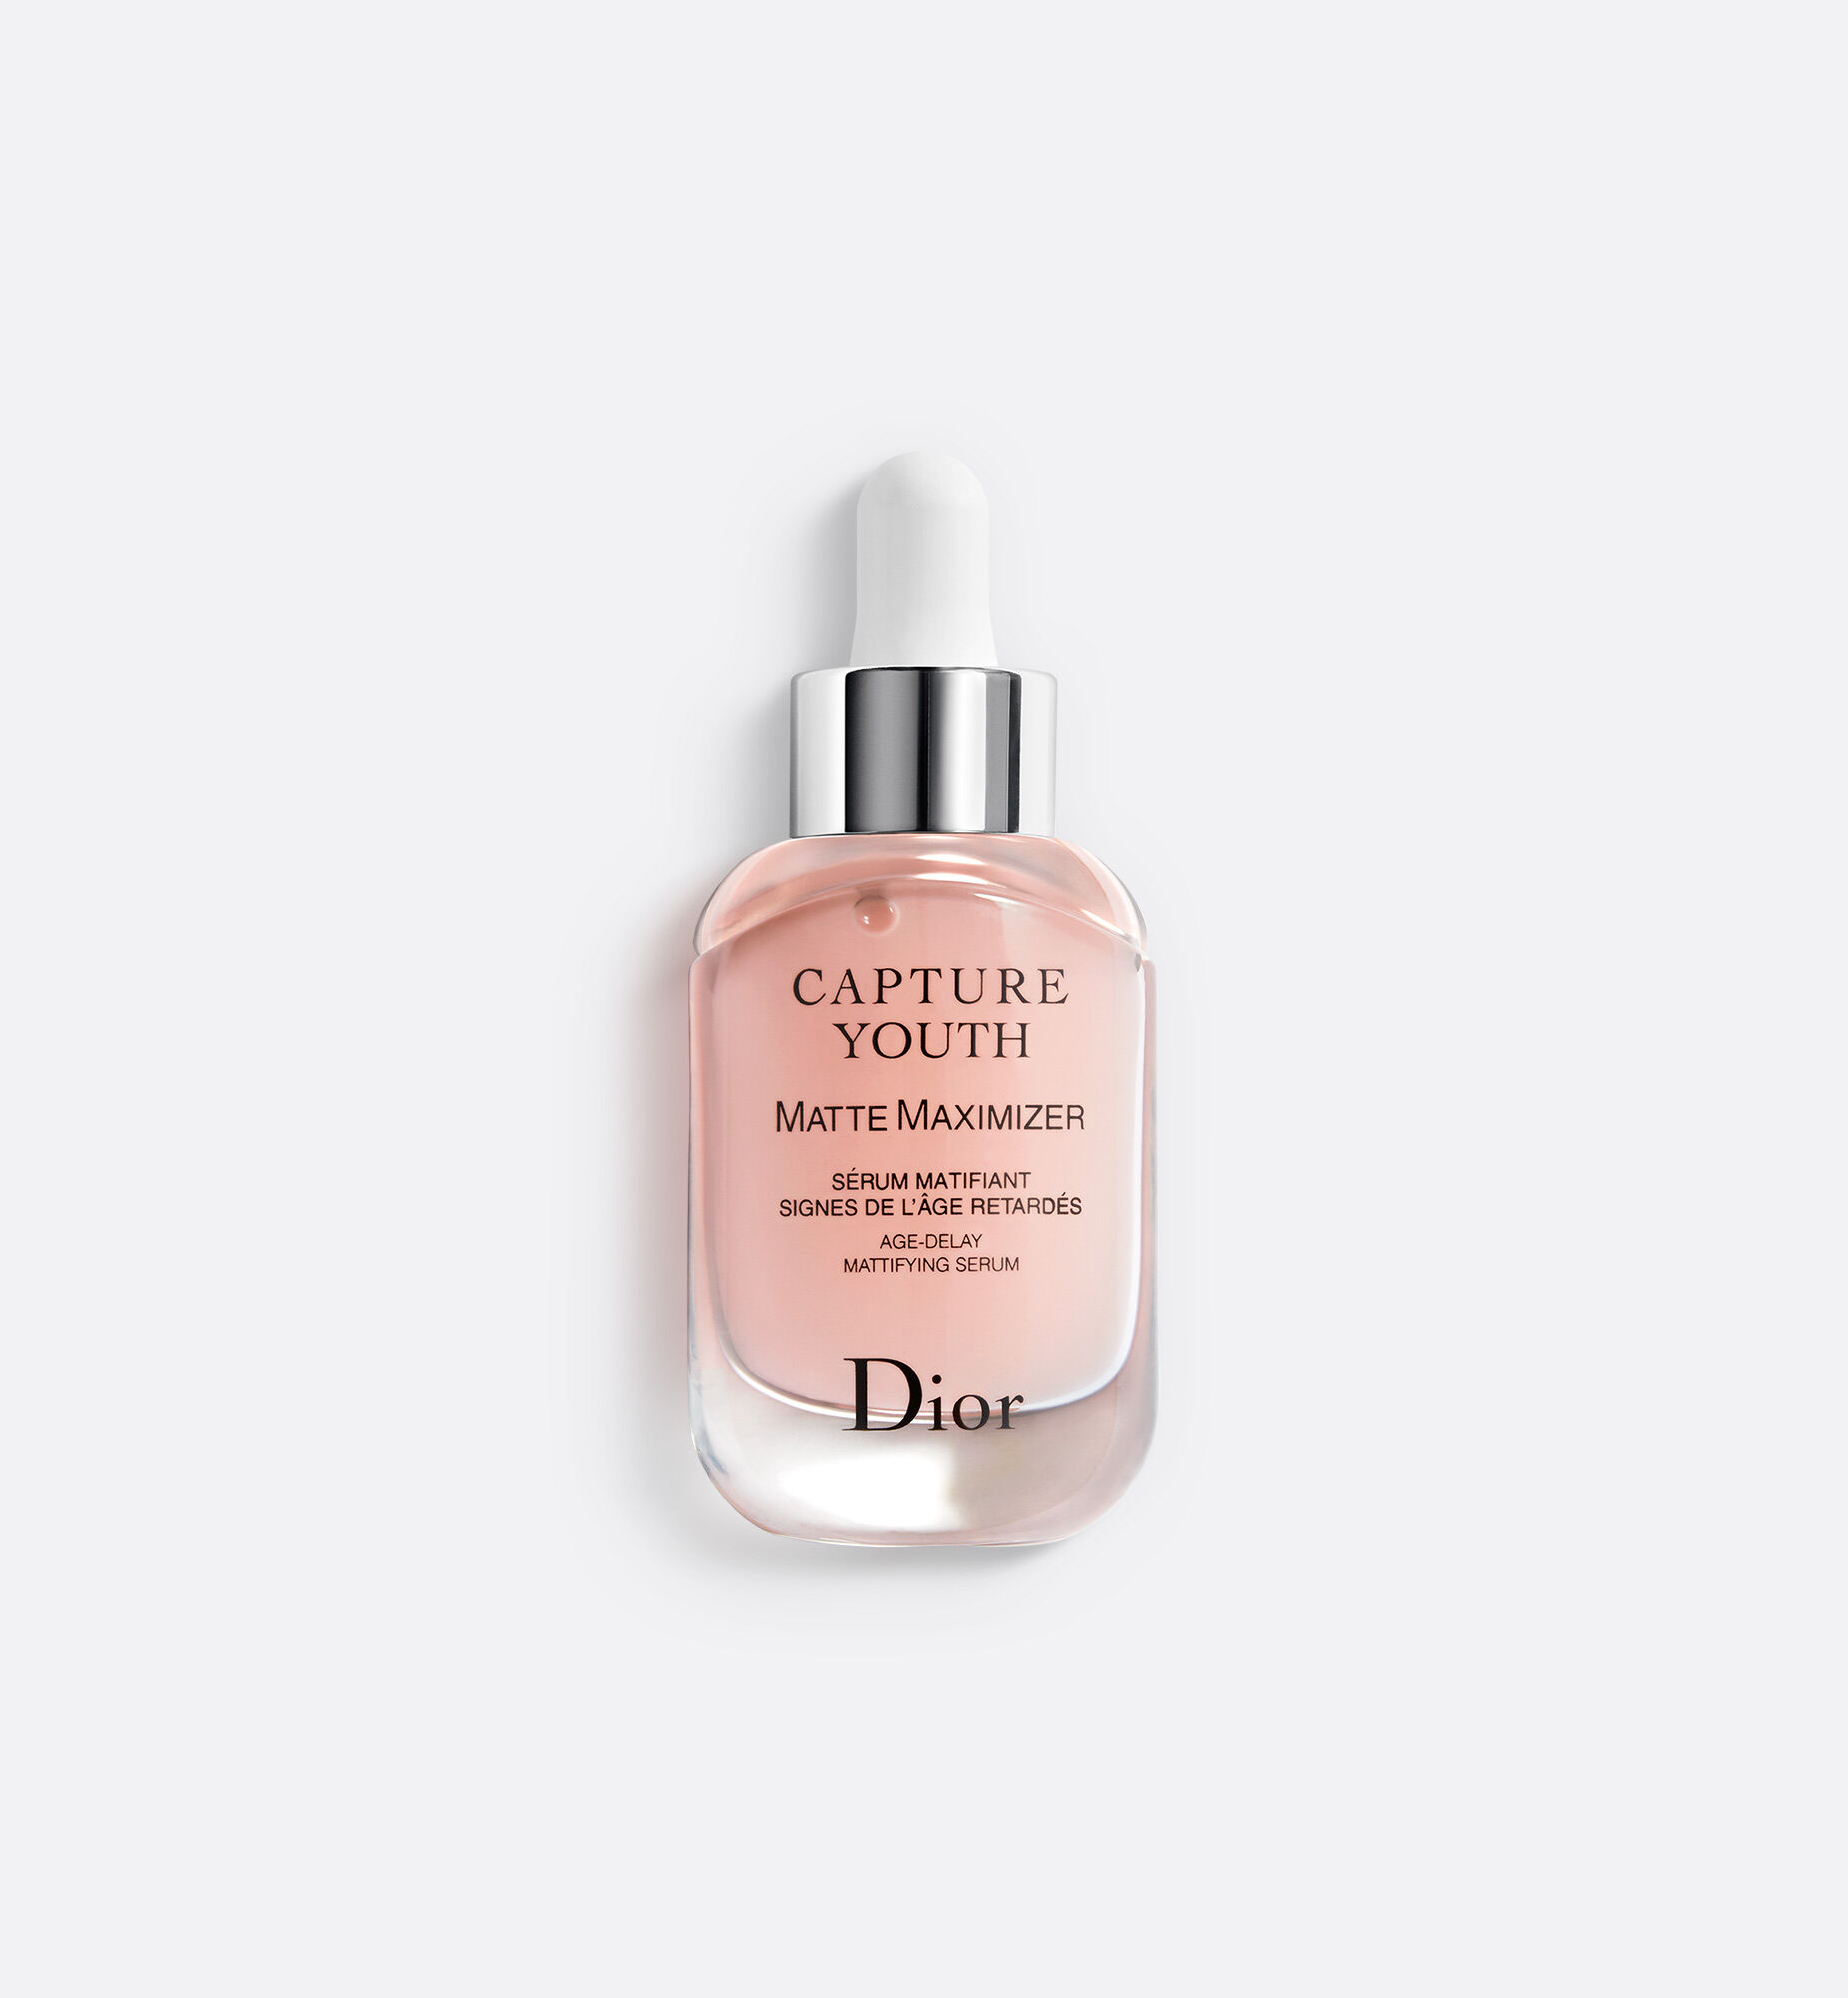 Capture Youth Plump filler agedelay plumping serum  The collections   Skincare  DIOR